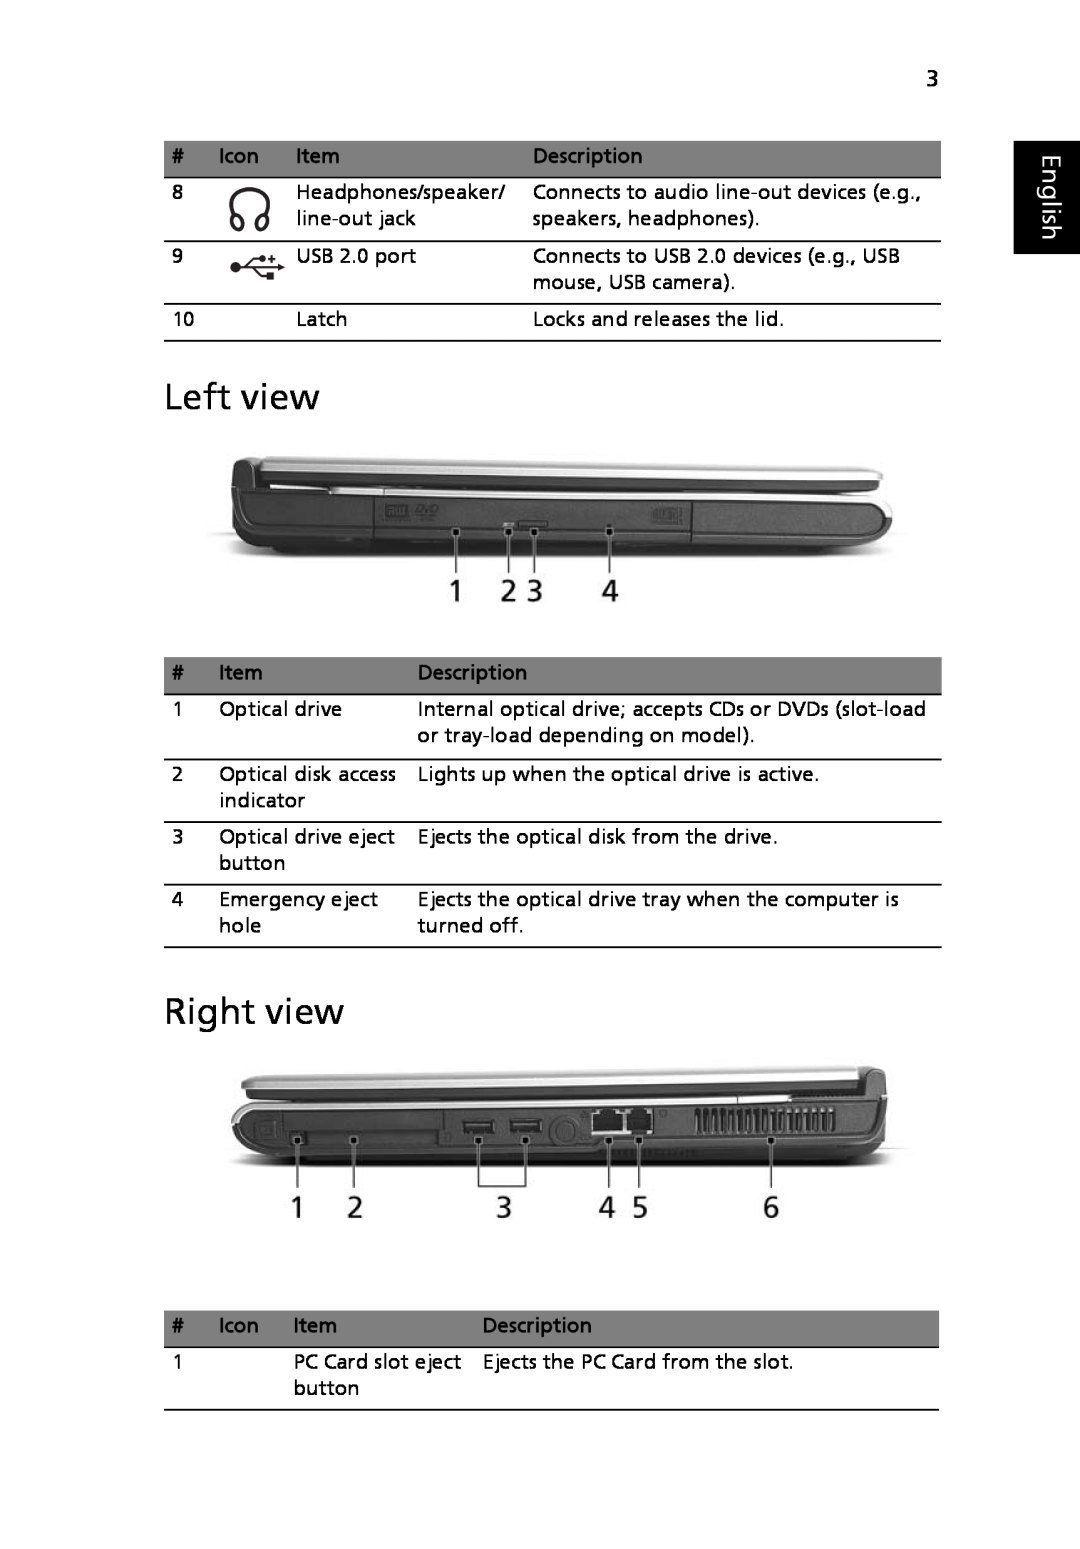 Acer 3630 manual Left view, Right view, English 